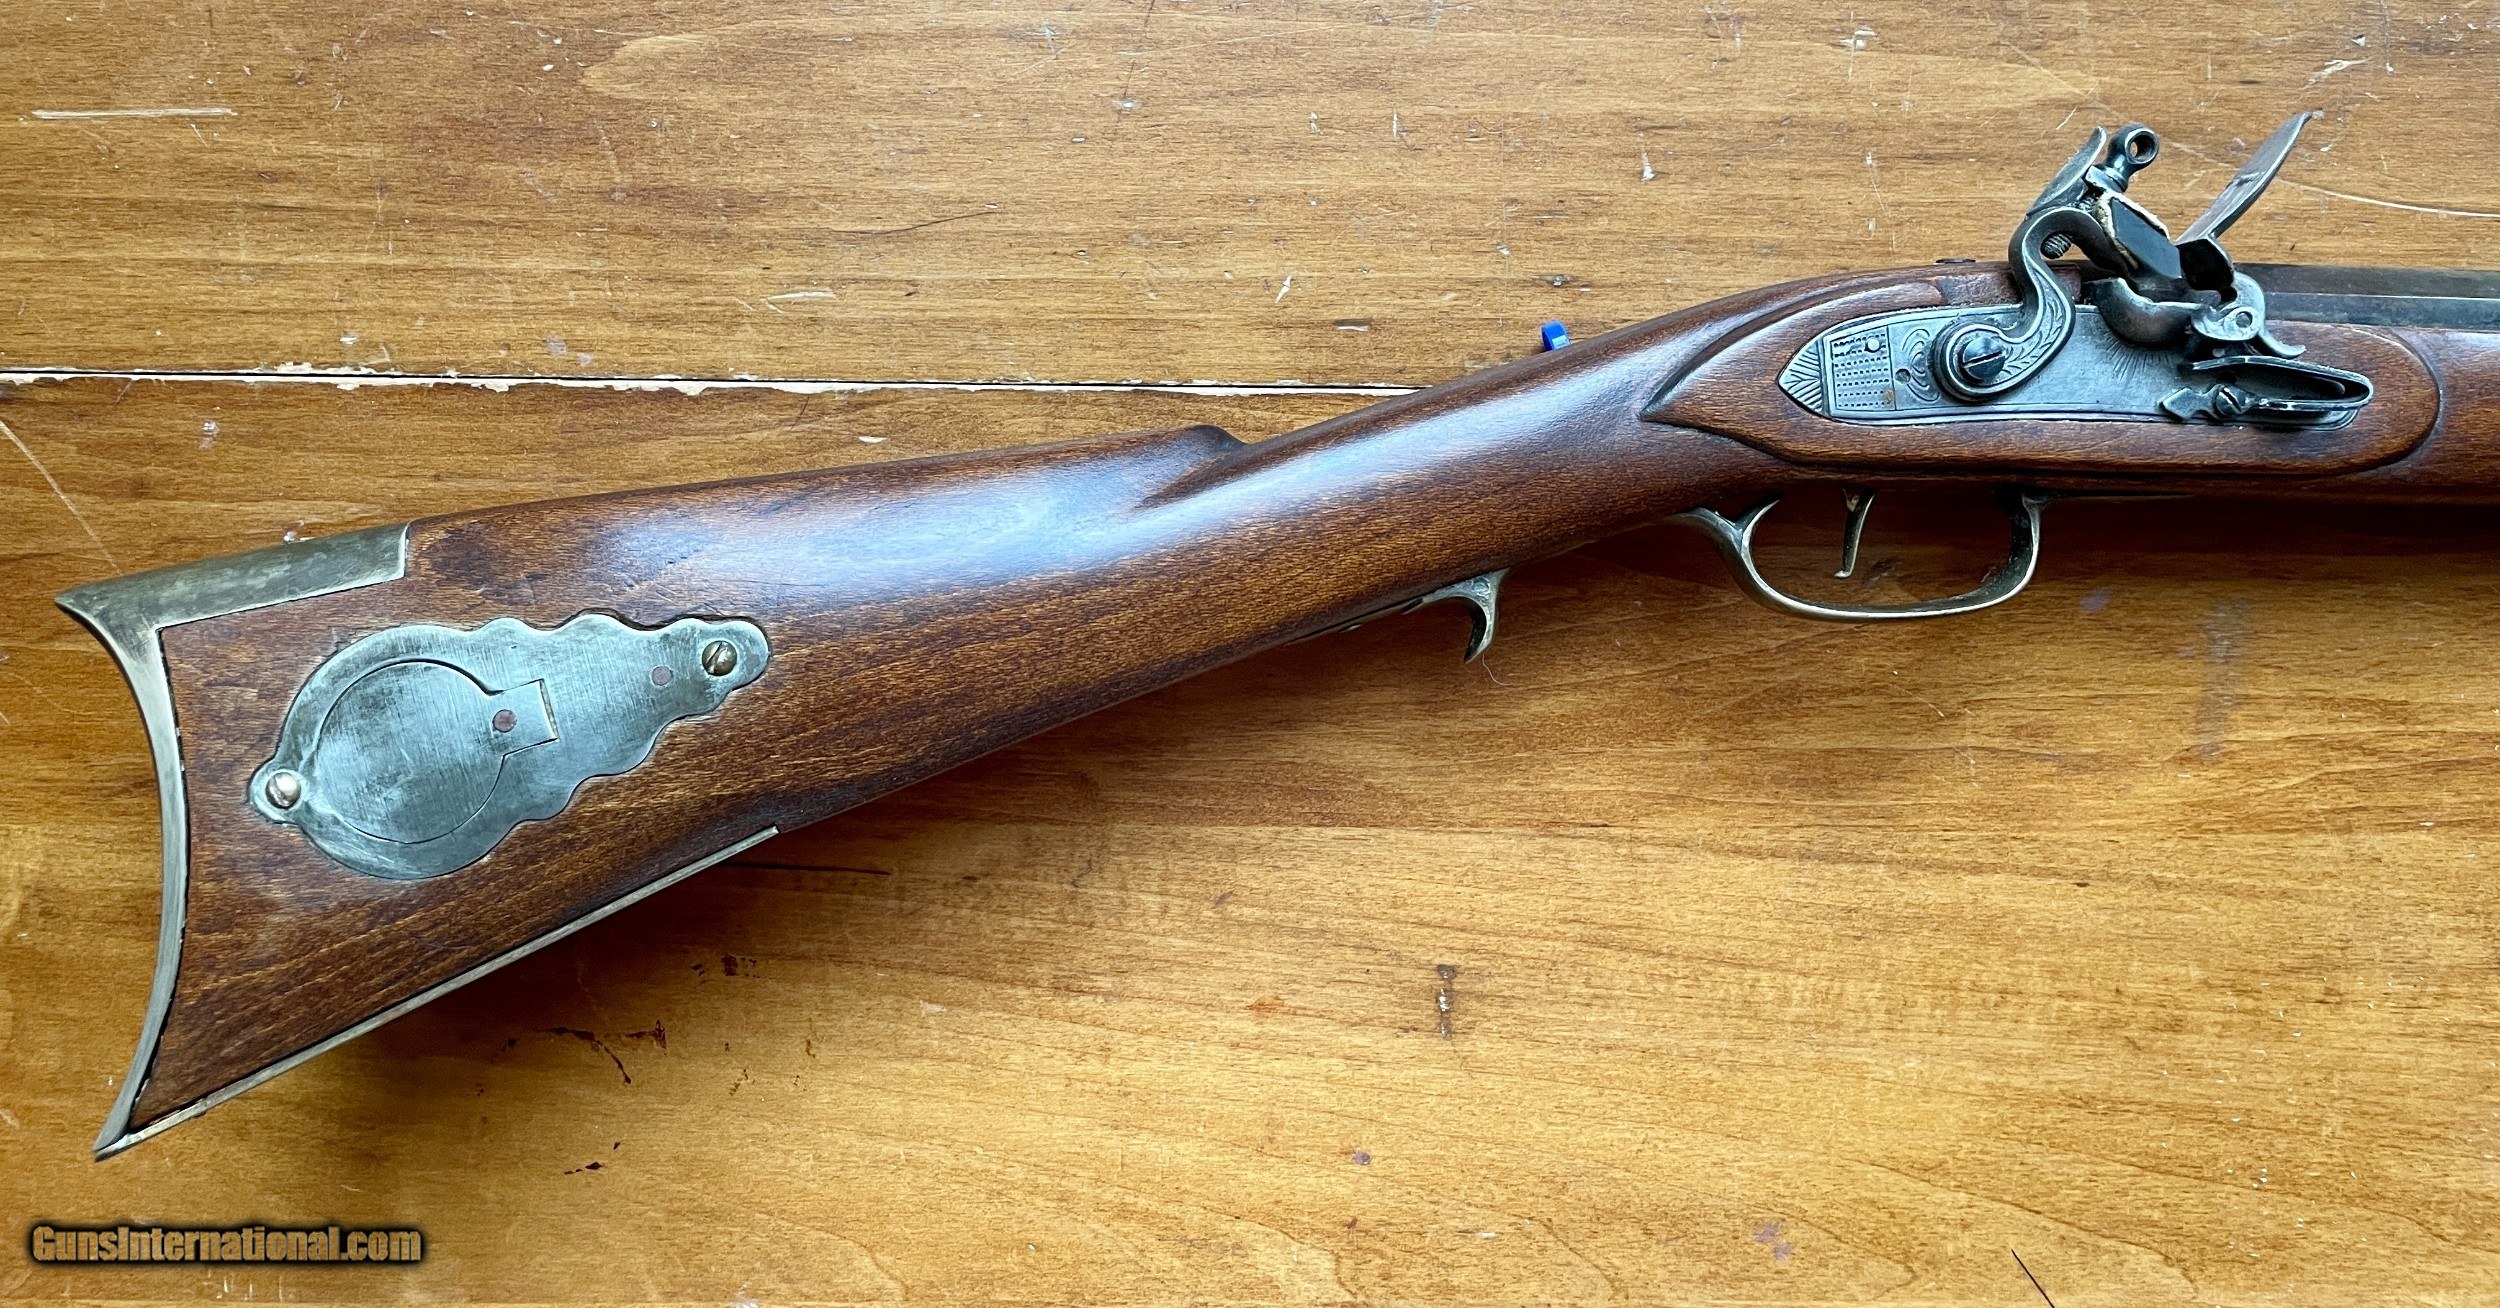 Made-from-kit Kentucky rifle in 45 caliber, from an obscure Spanish  company, Jukar